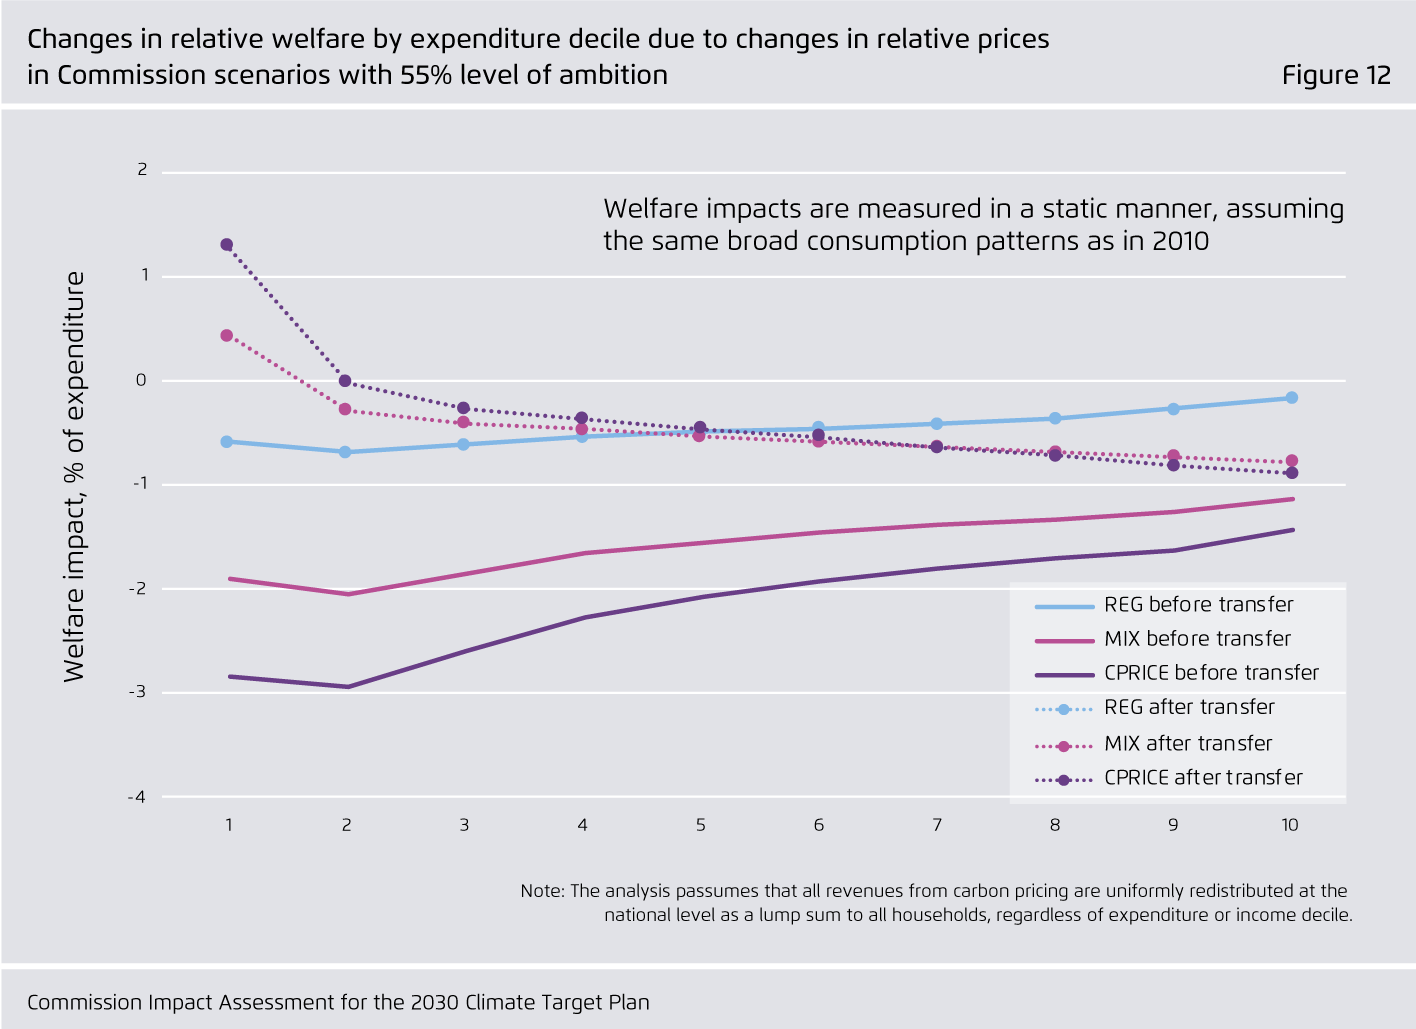 Preview for Changes in relative welfare by expenditure decile due to changes in relative prices in Commission scenarios with 55% level of ambition